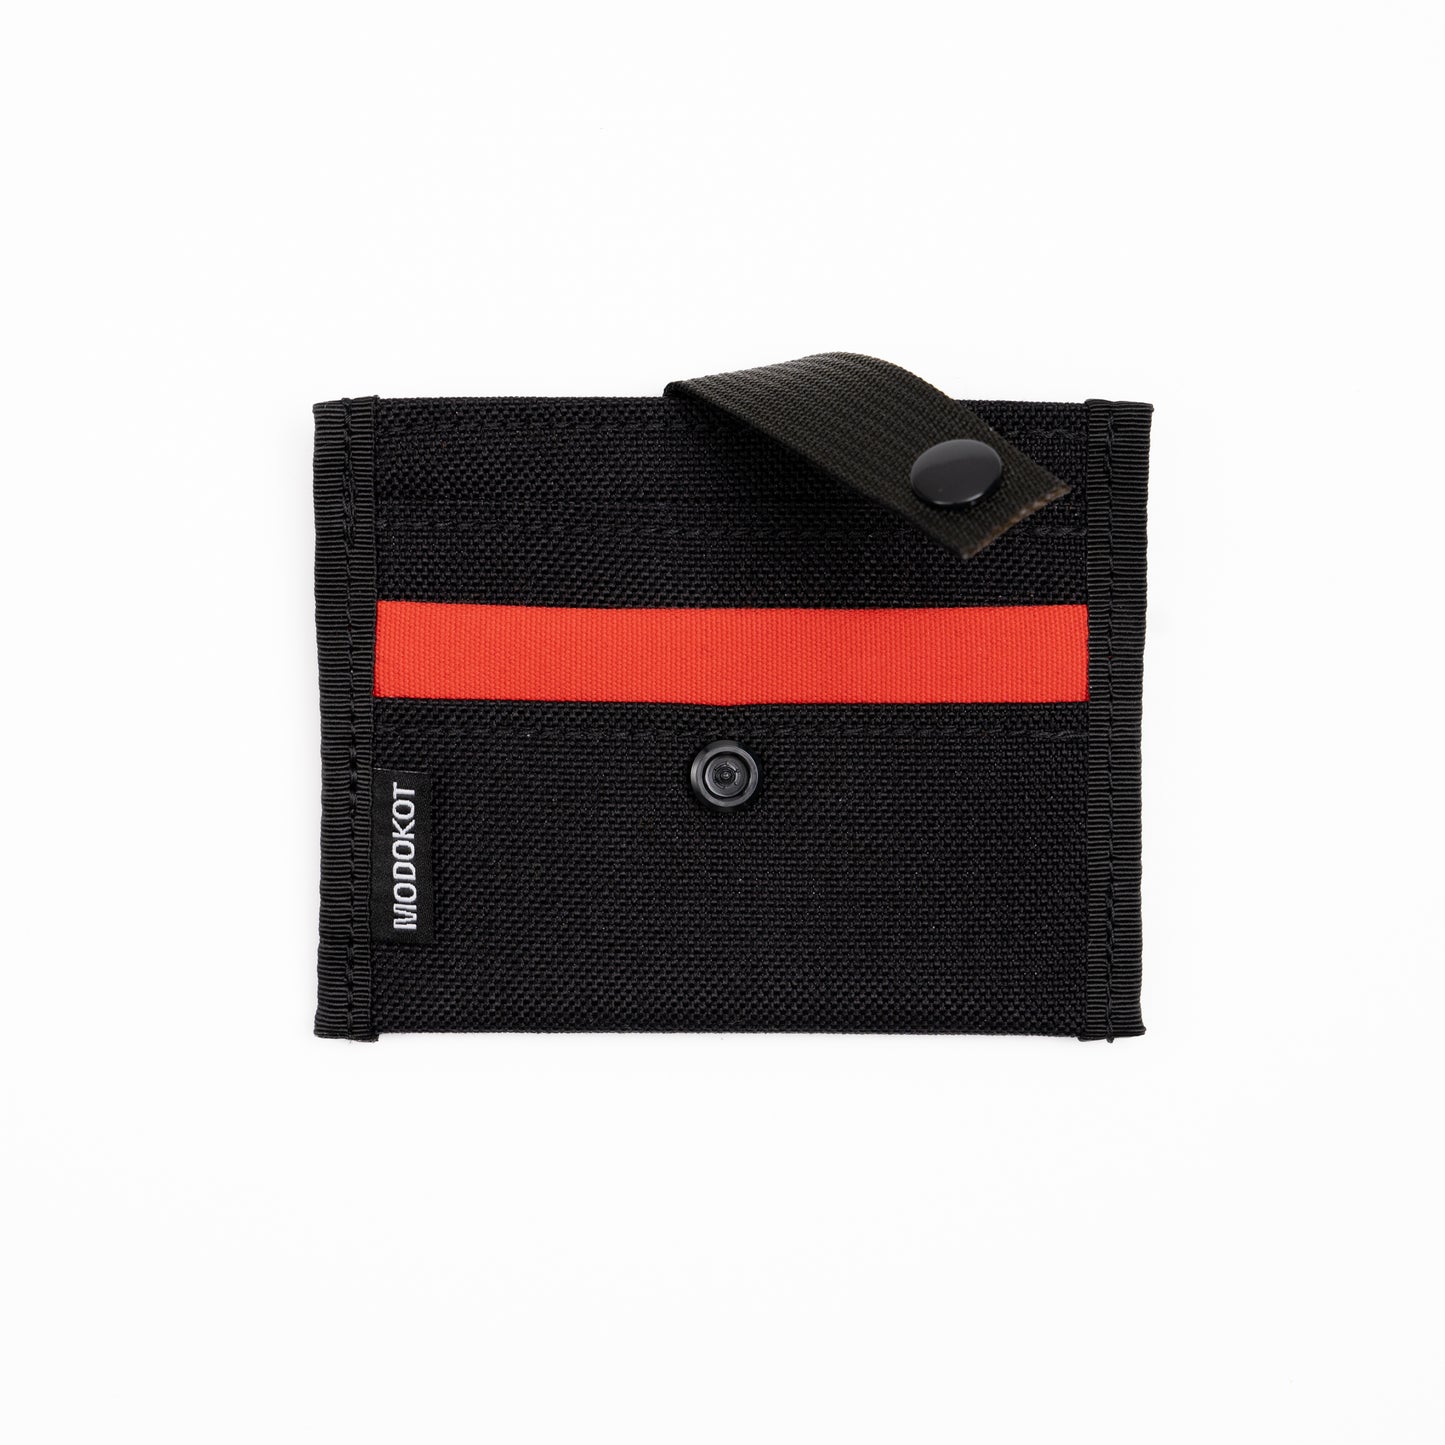 The Slim Wallet - Red